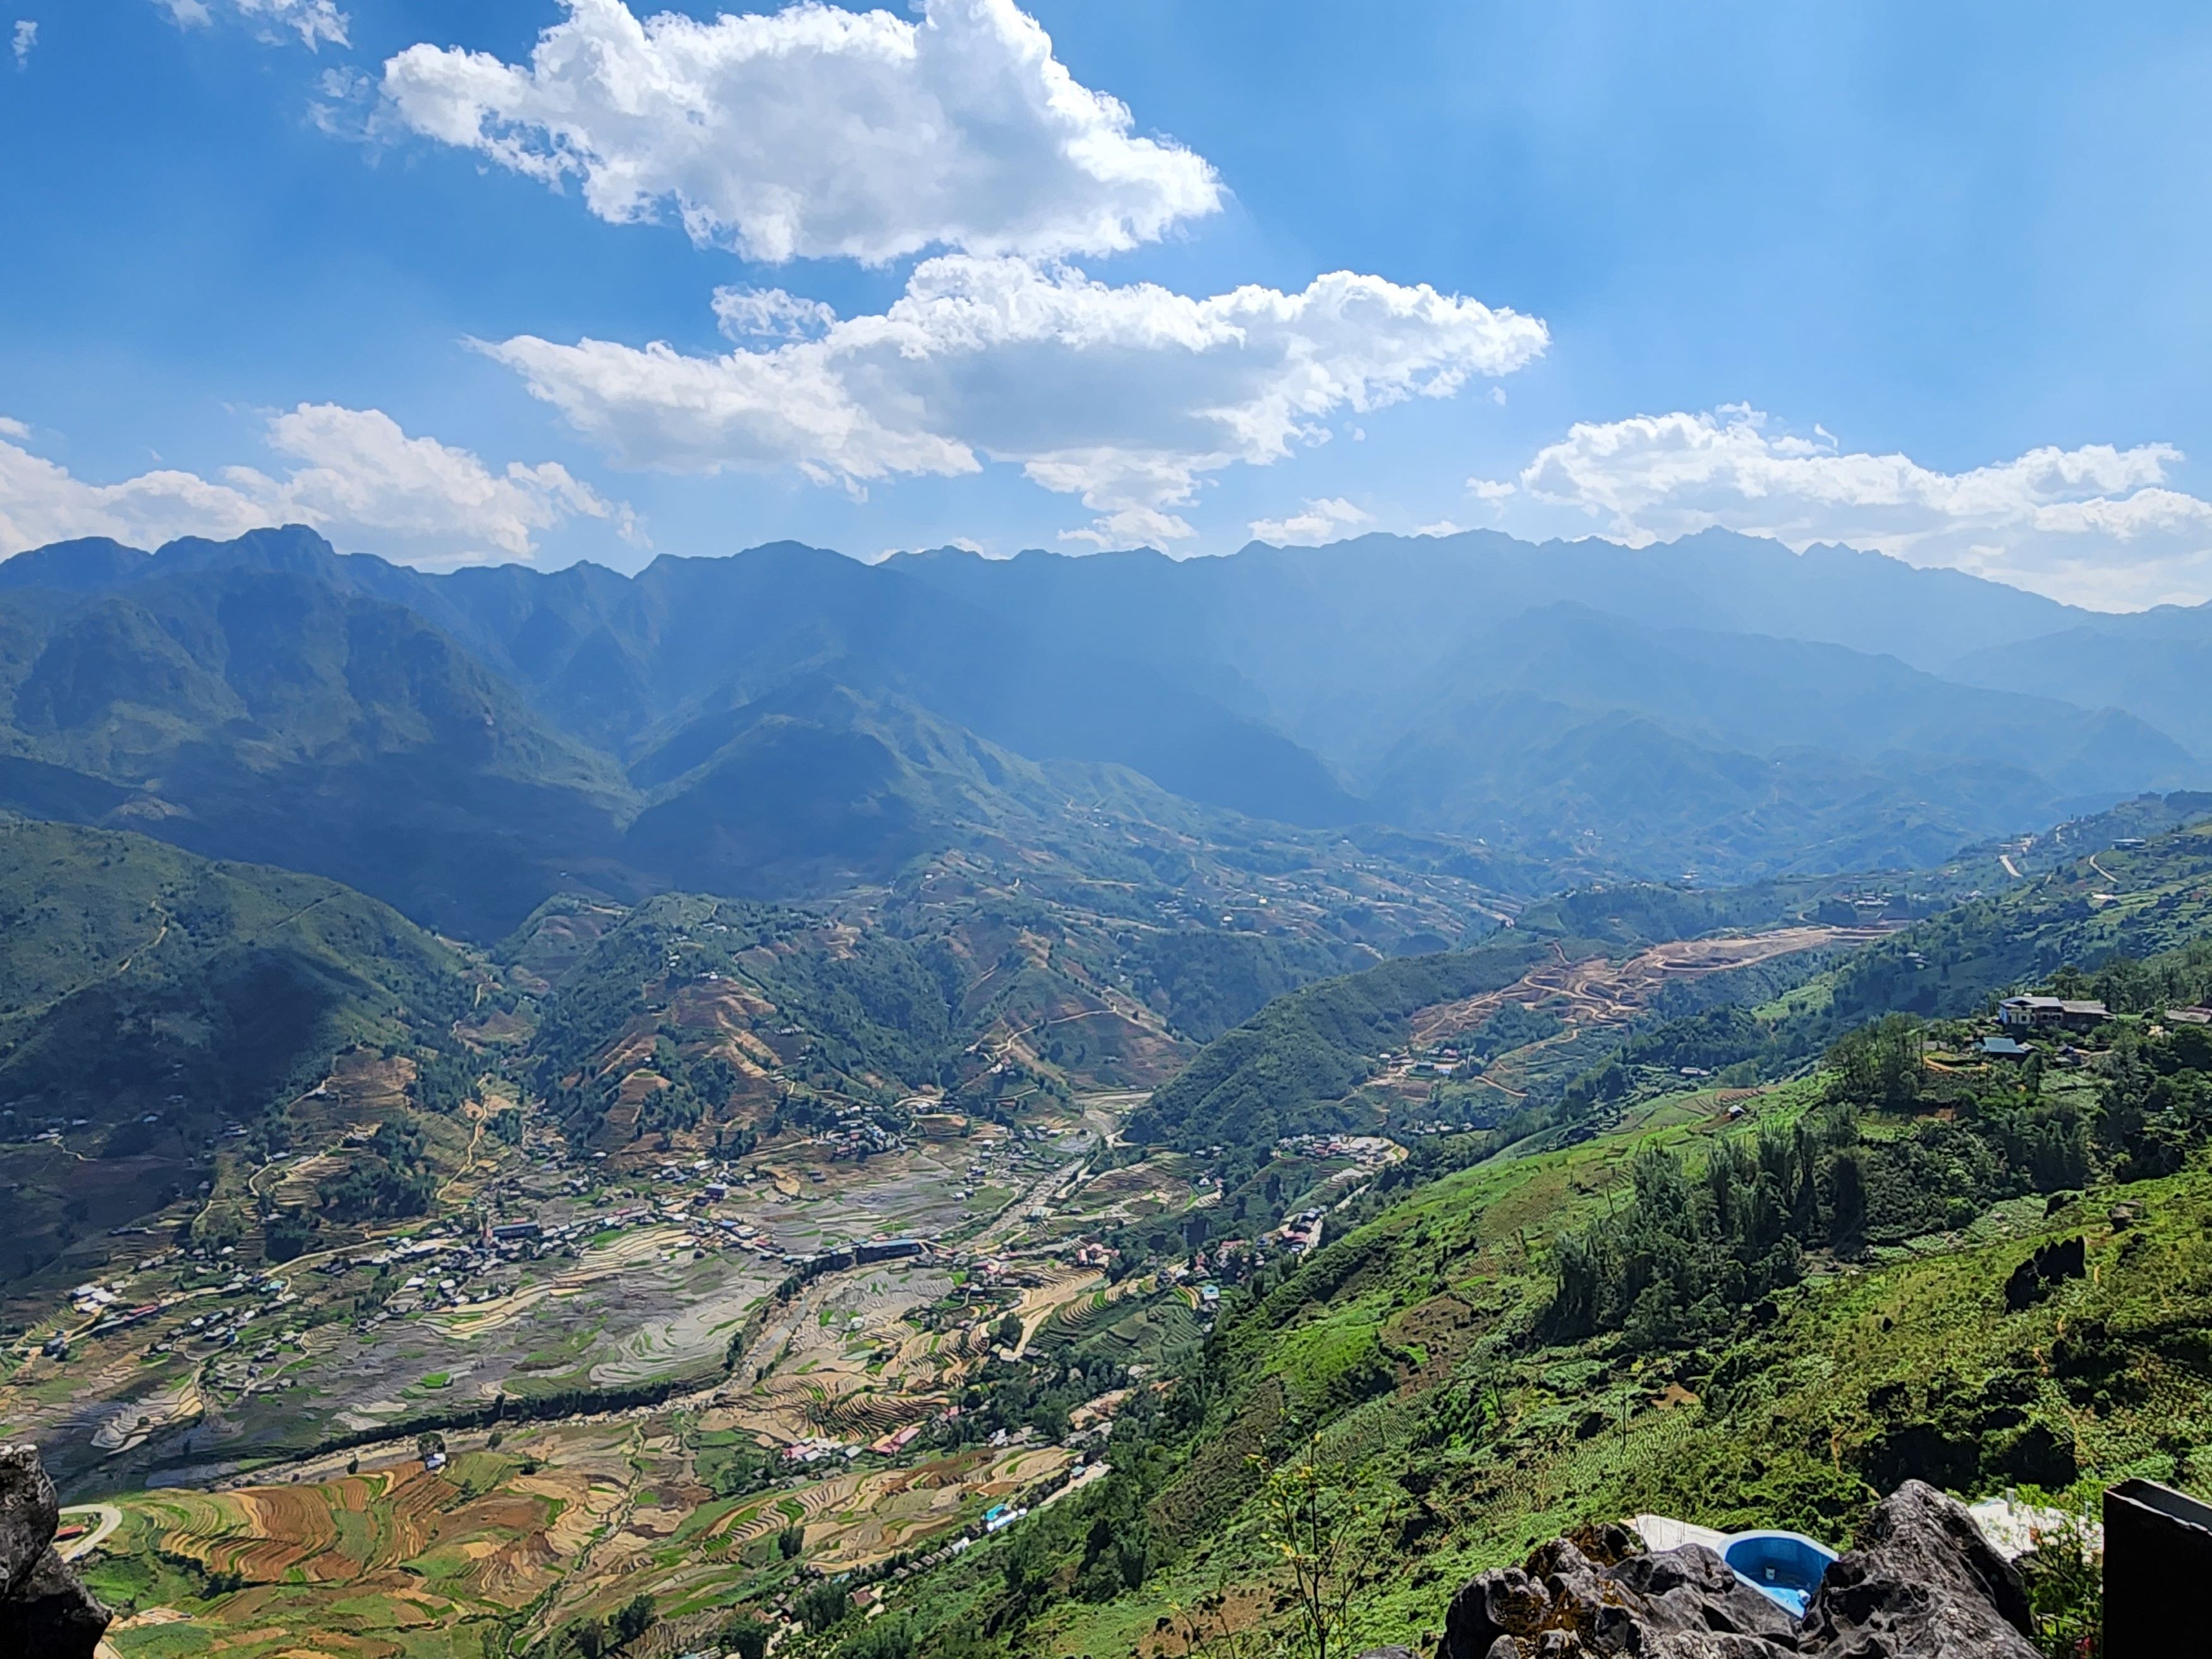 Sapa: How to Have an Unforgettable Experience Trekking through Mountains and Rice Fields